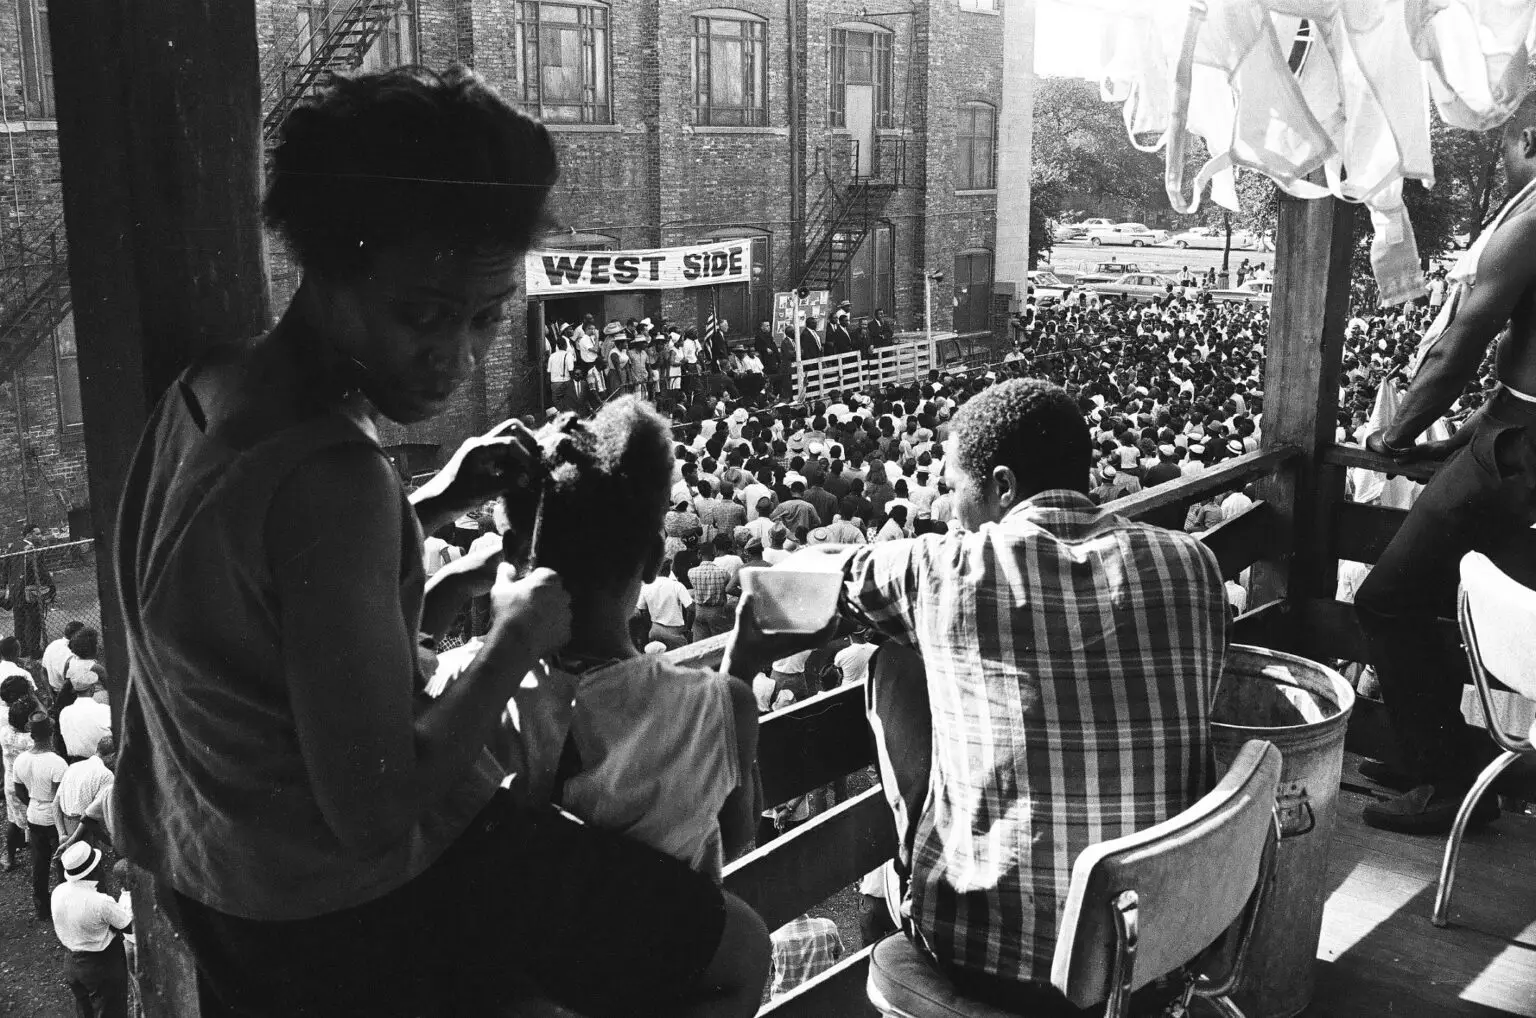 A family sits on a balcony above a very crowded street filled with people. A banner across the street reads "West Side."